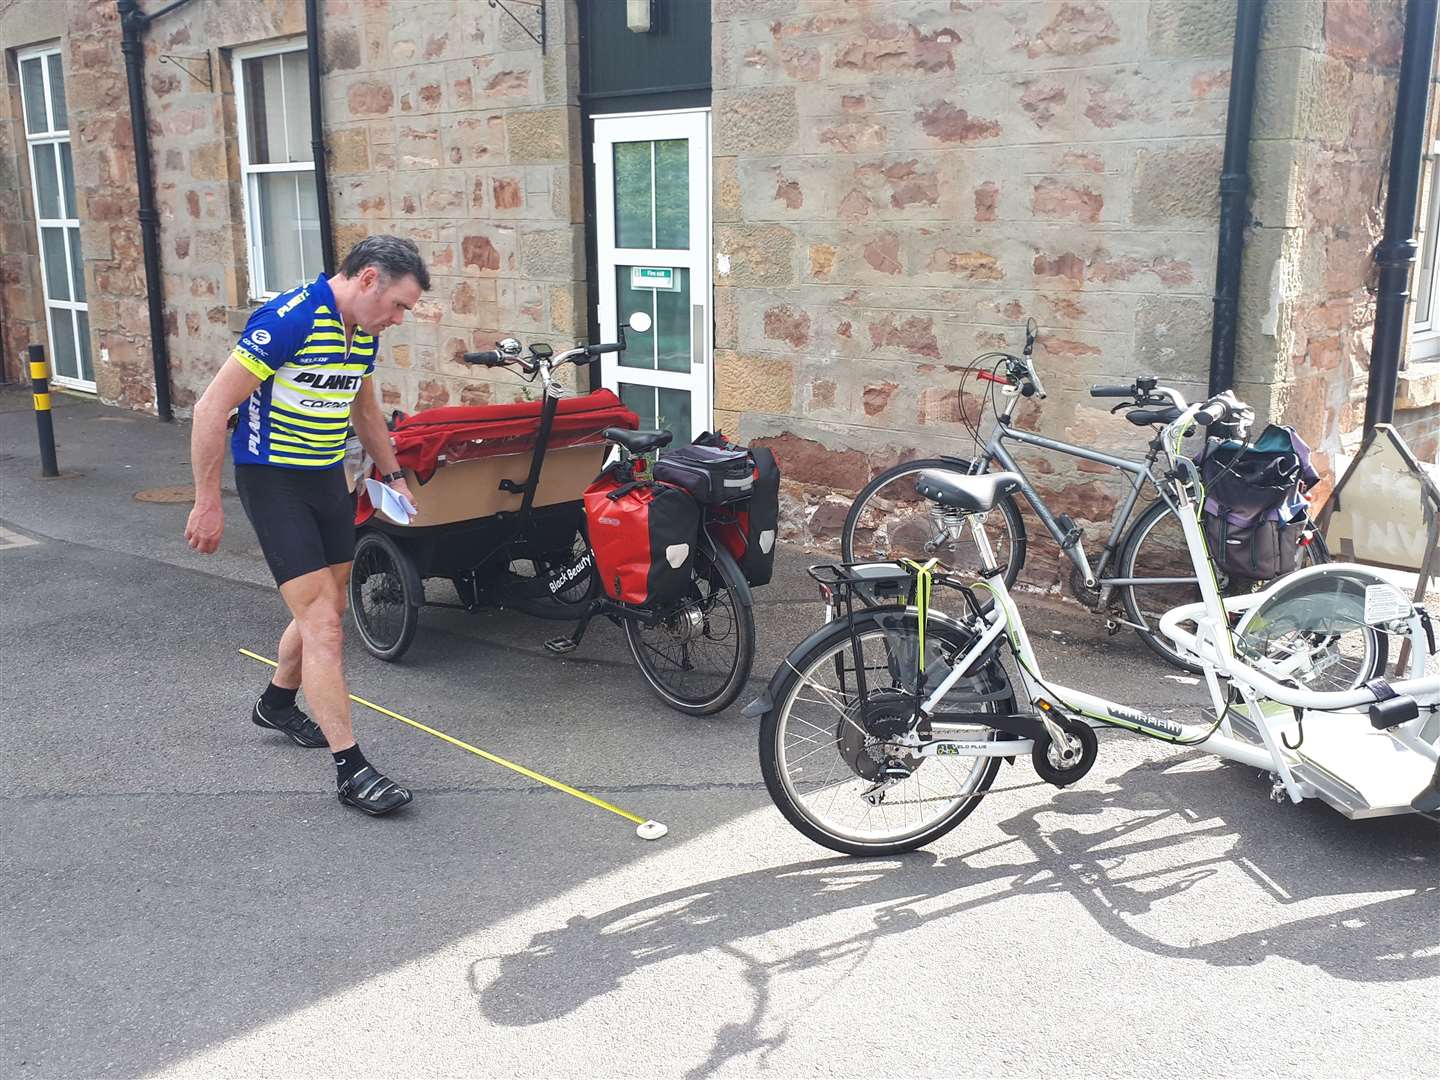 Graeme Campbell of Highland Council checking the dimensions of the trikes.